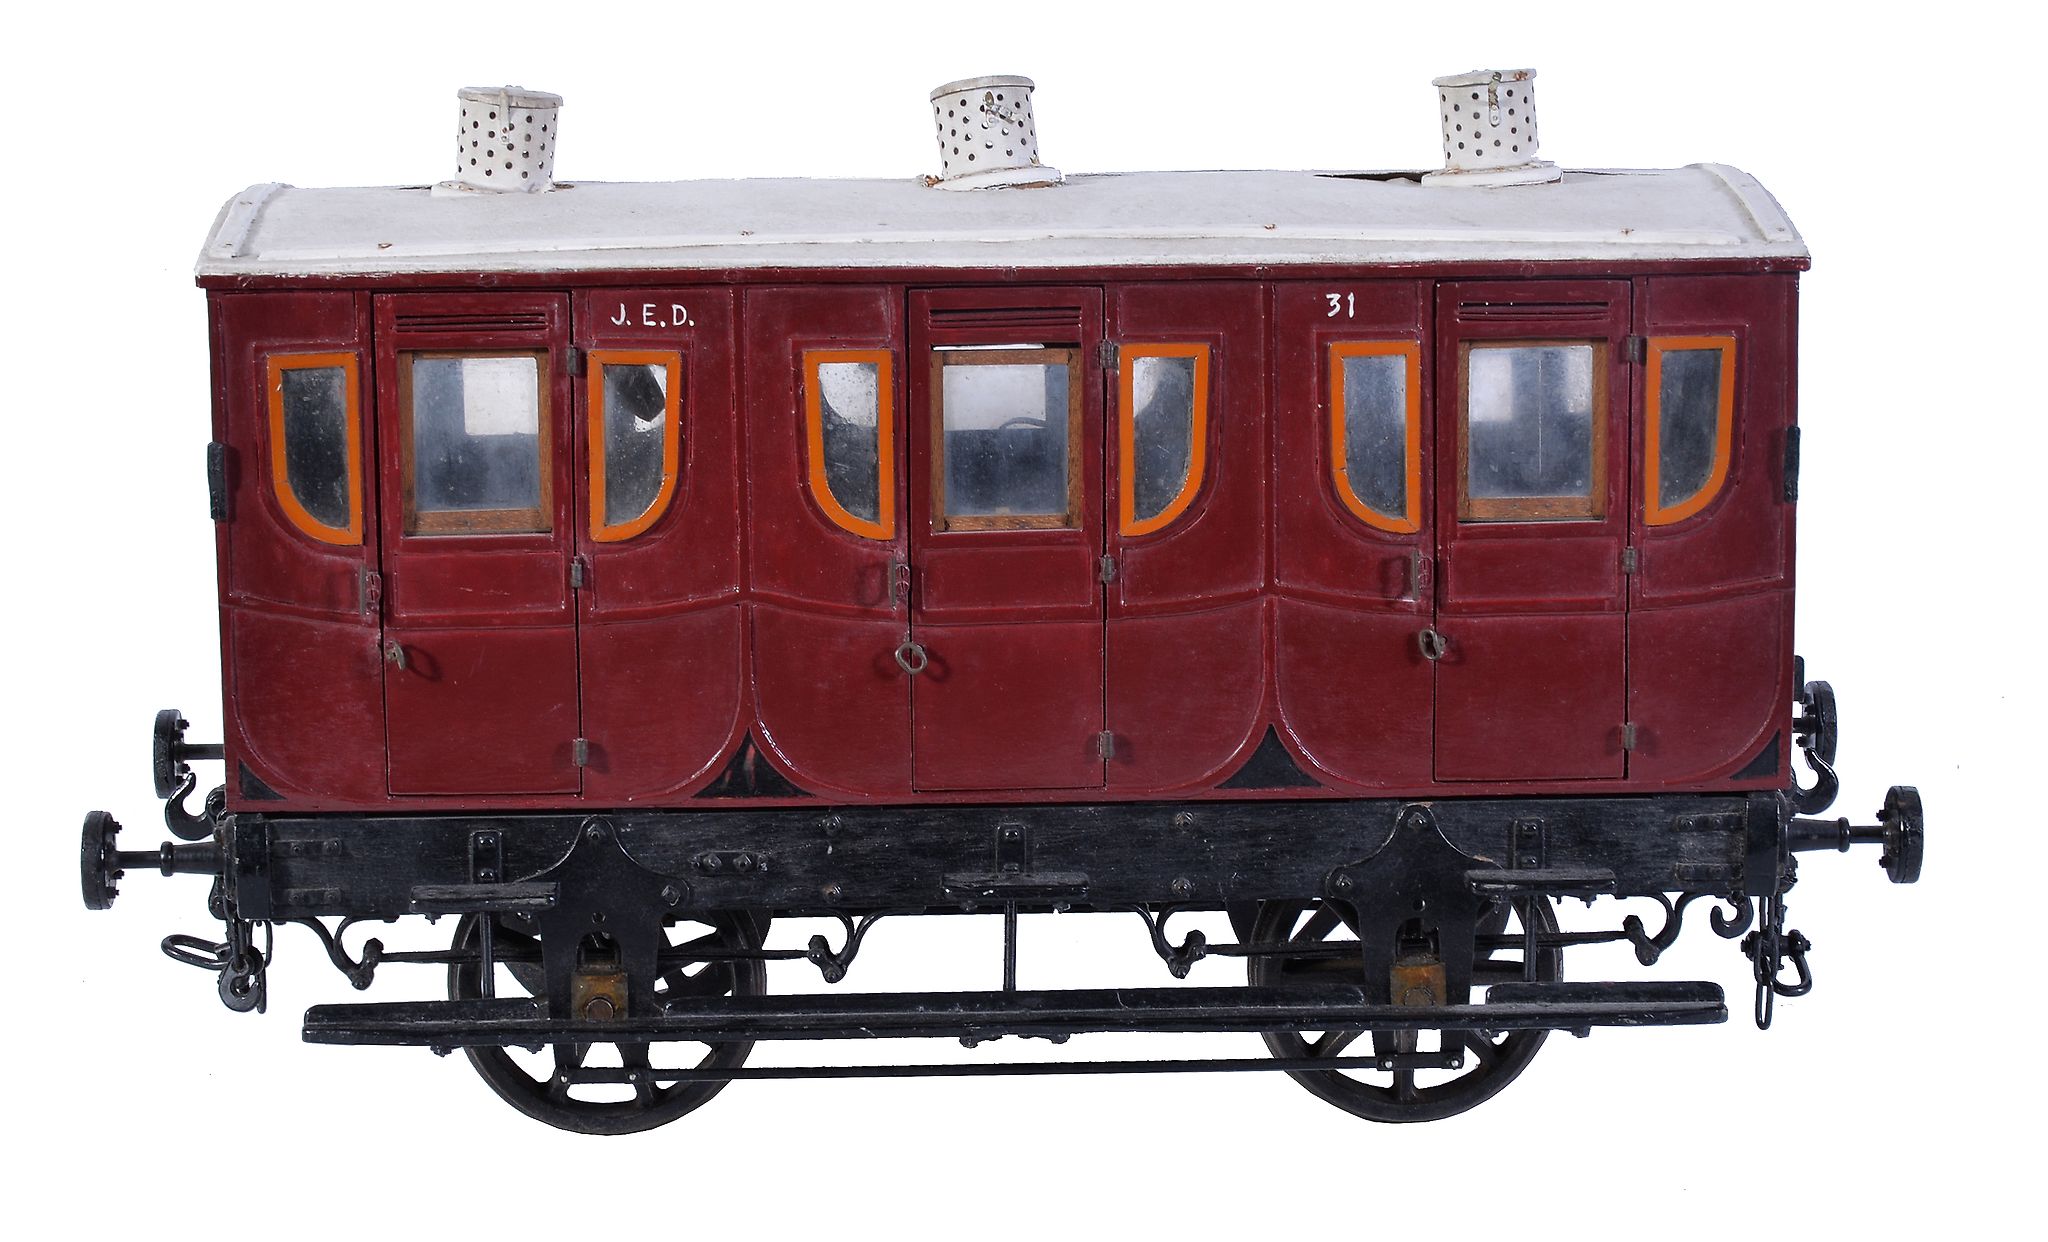 A rare model of a 19th century 4 Â¾ inch gauge railway coach, with original fitted interior having